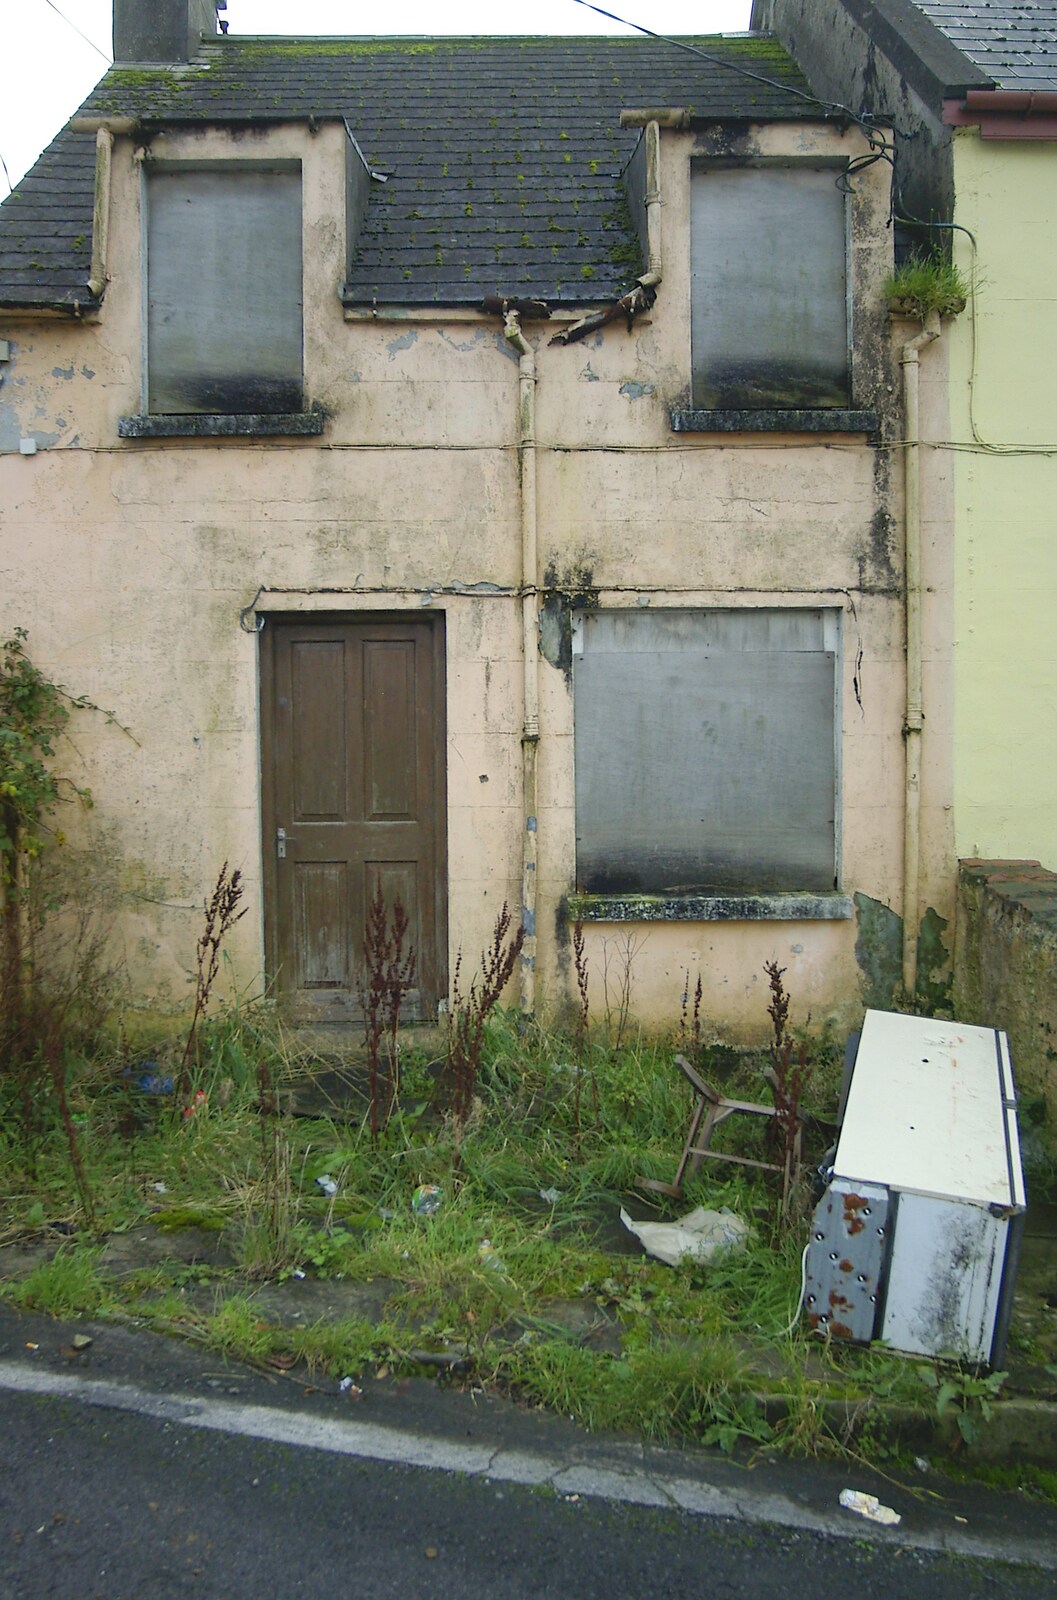 A derelict house from Corofin, Ennistymon and The Burran, County Clare, Western Ireland - 27th October 2006